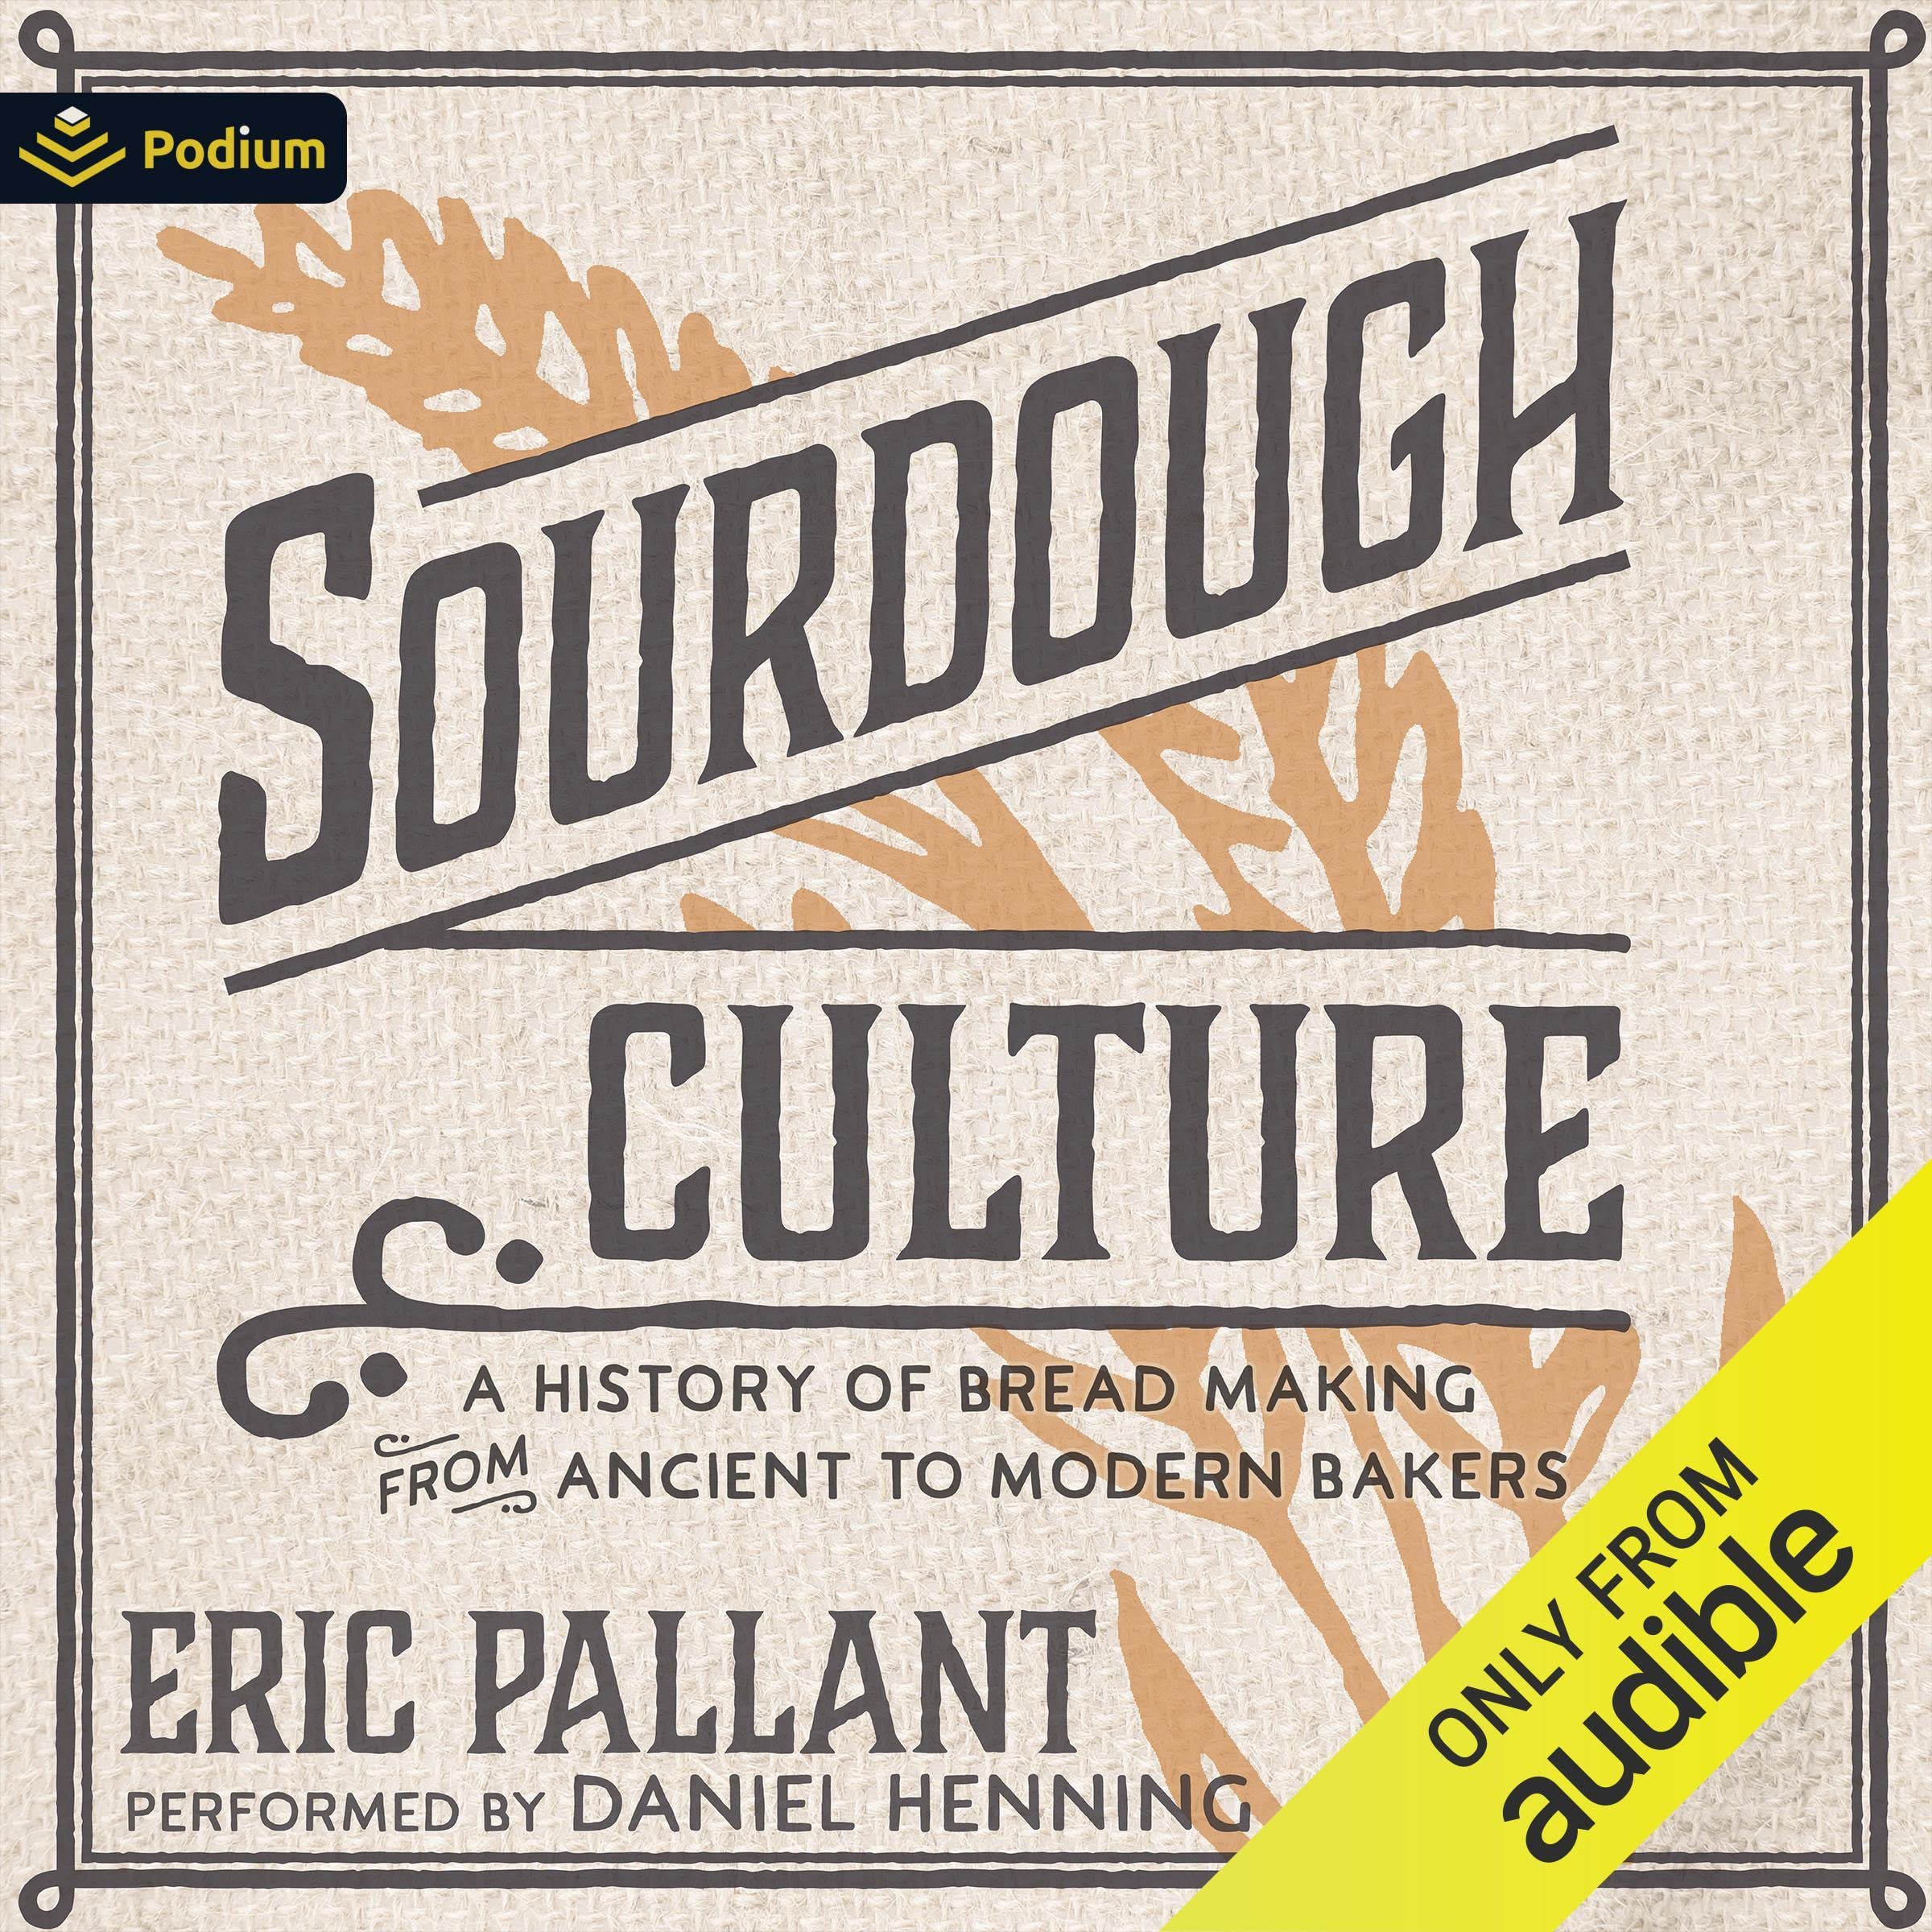 Sourdough Culture: A History of Bread Making from Ancient to Modern Bakers